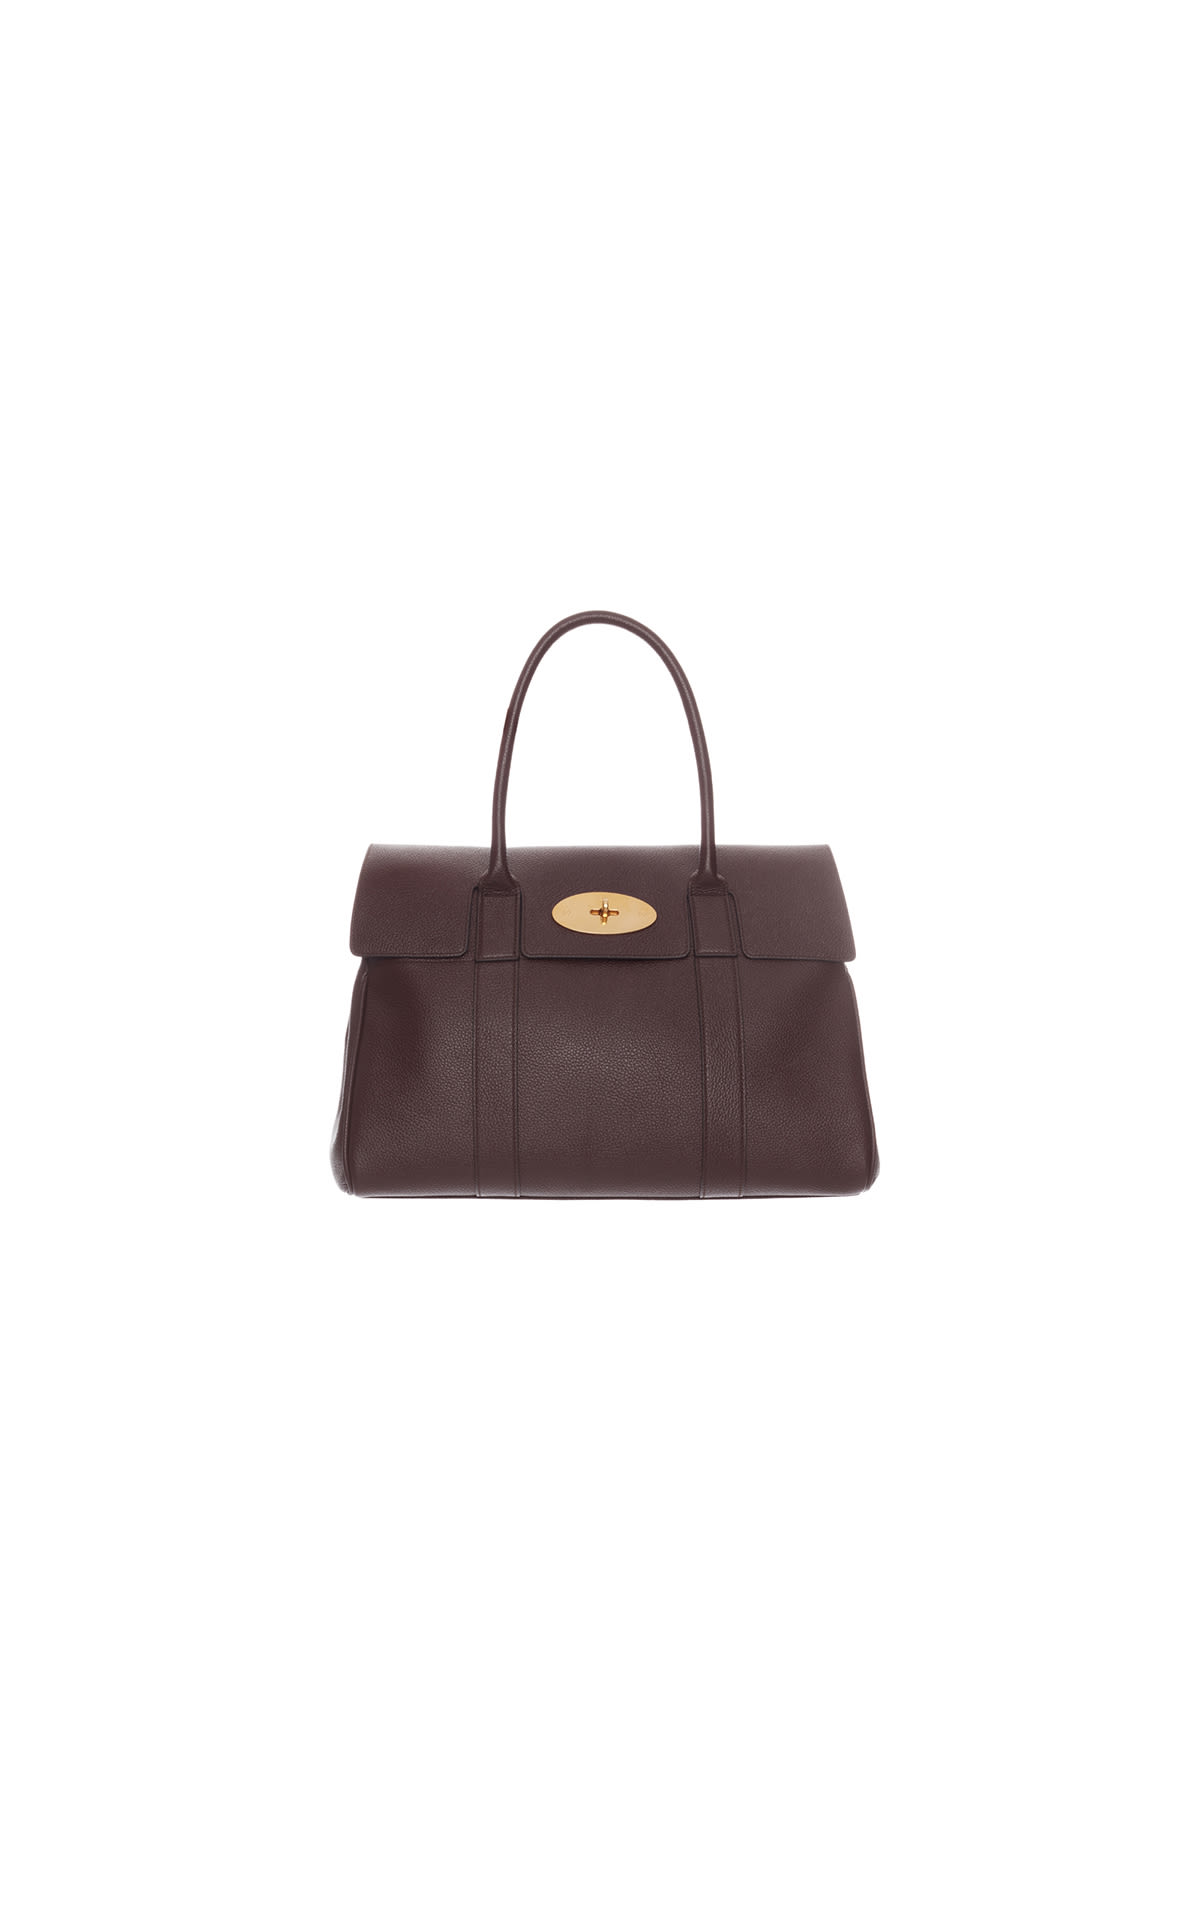 Mulberry Bayswater tote from Bicester Village